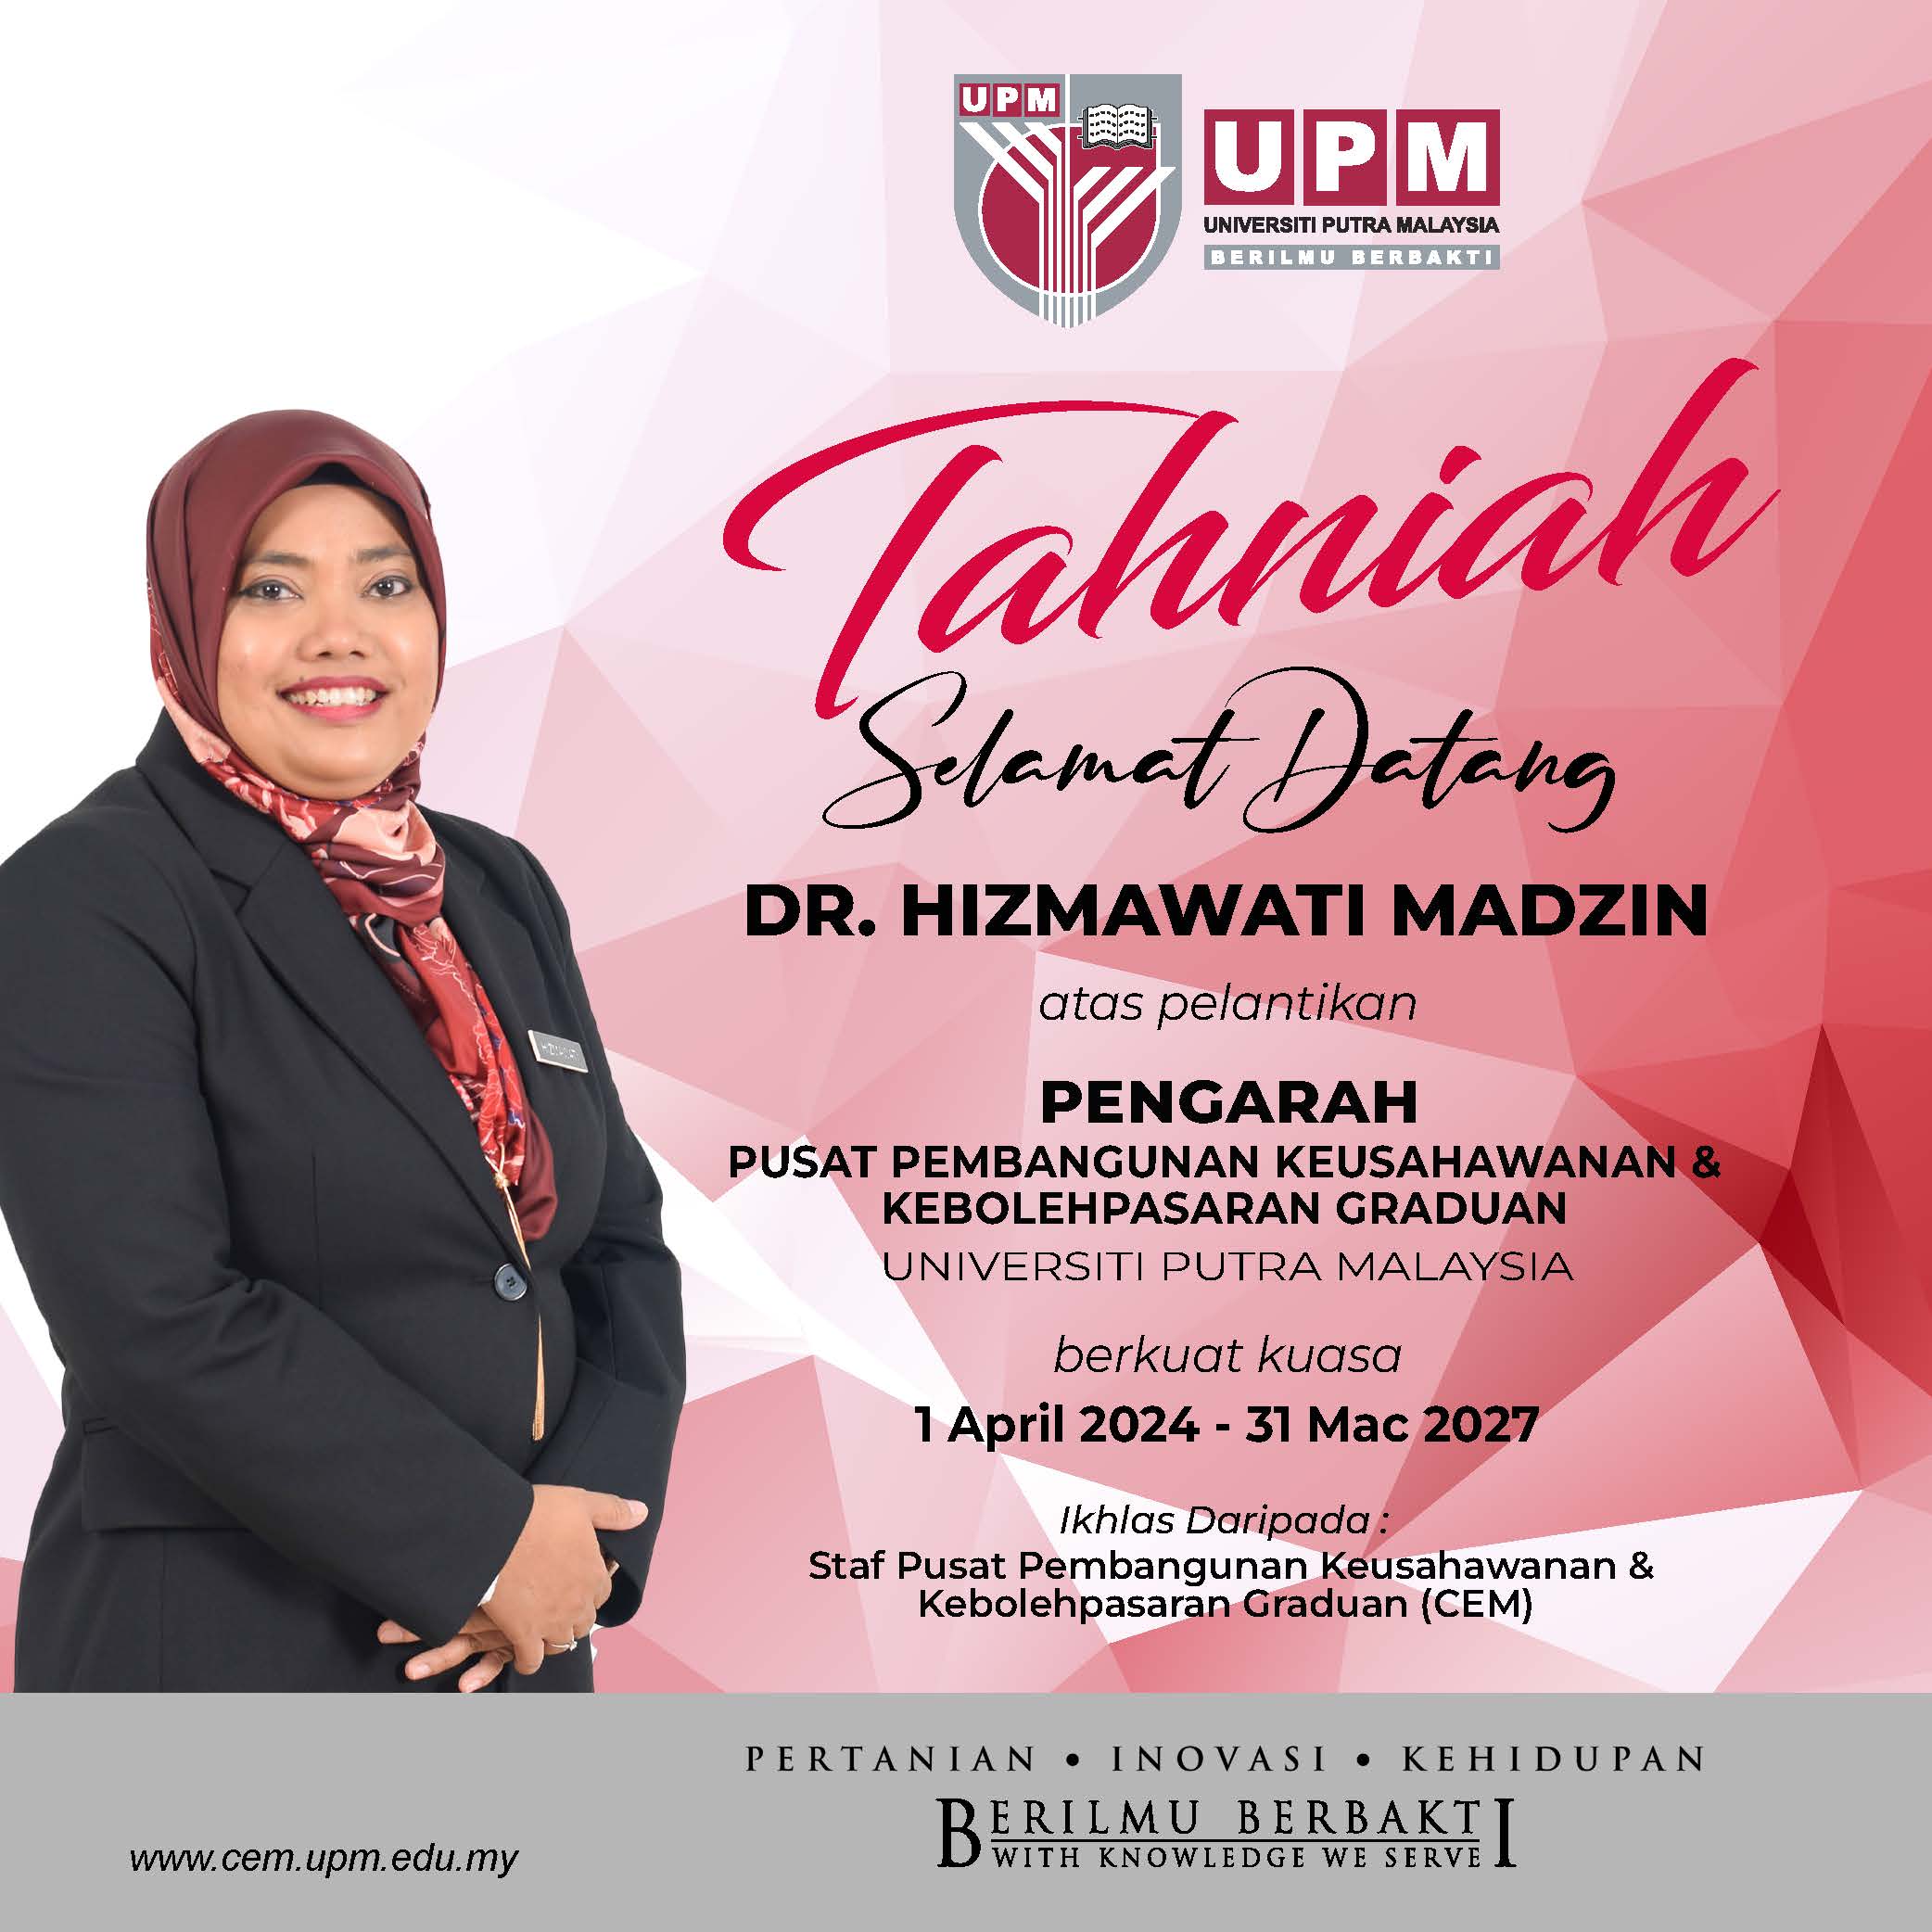 DR HIZMAWATI MADZIN APPOINTED AS NEW DIRECTOR OF CEM UPM